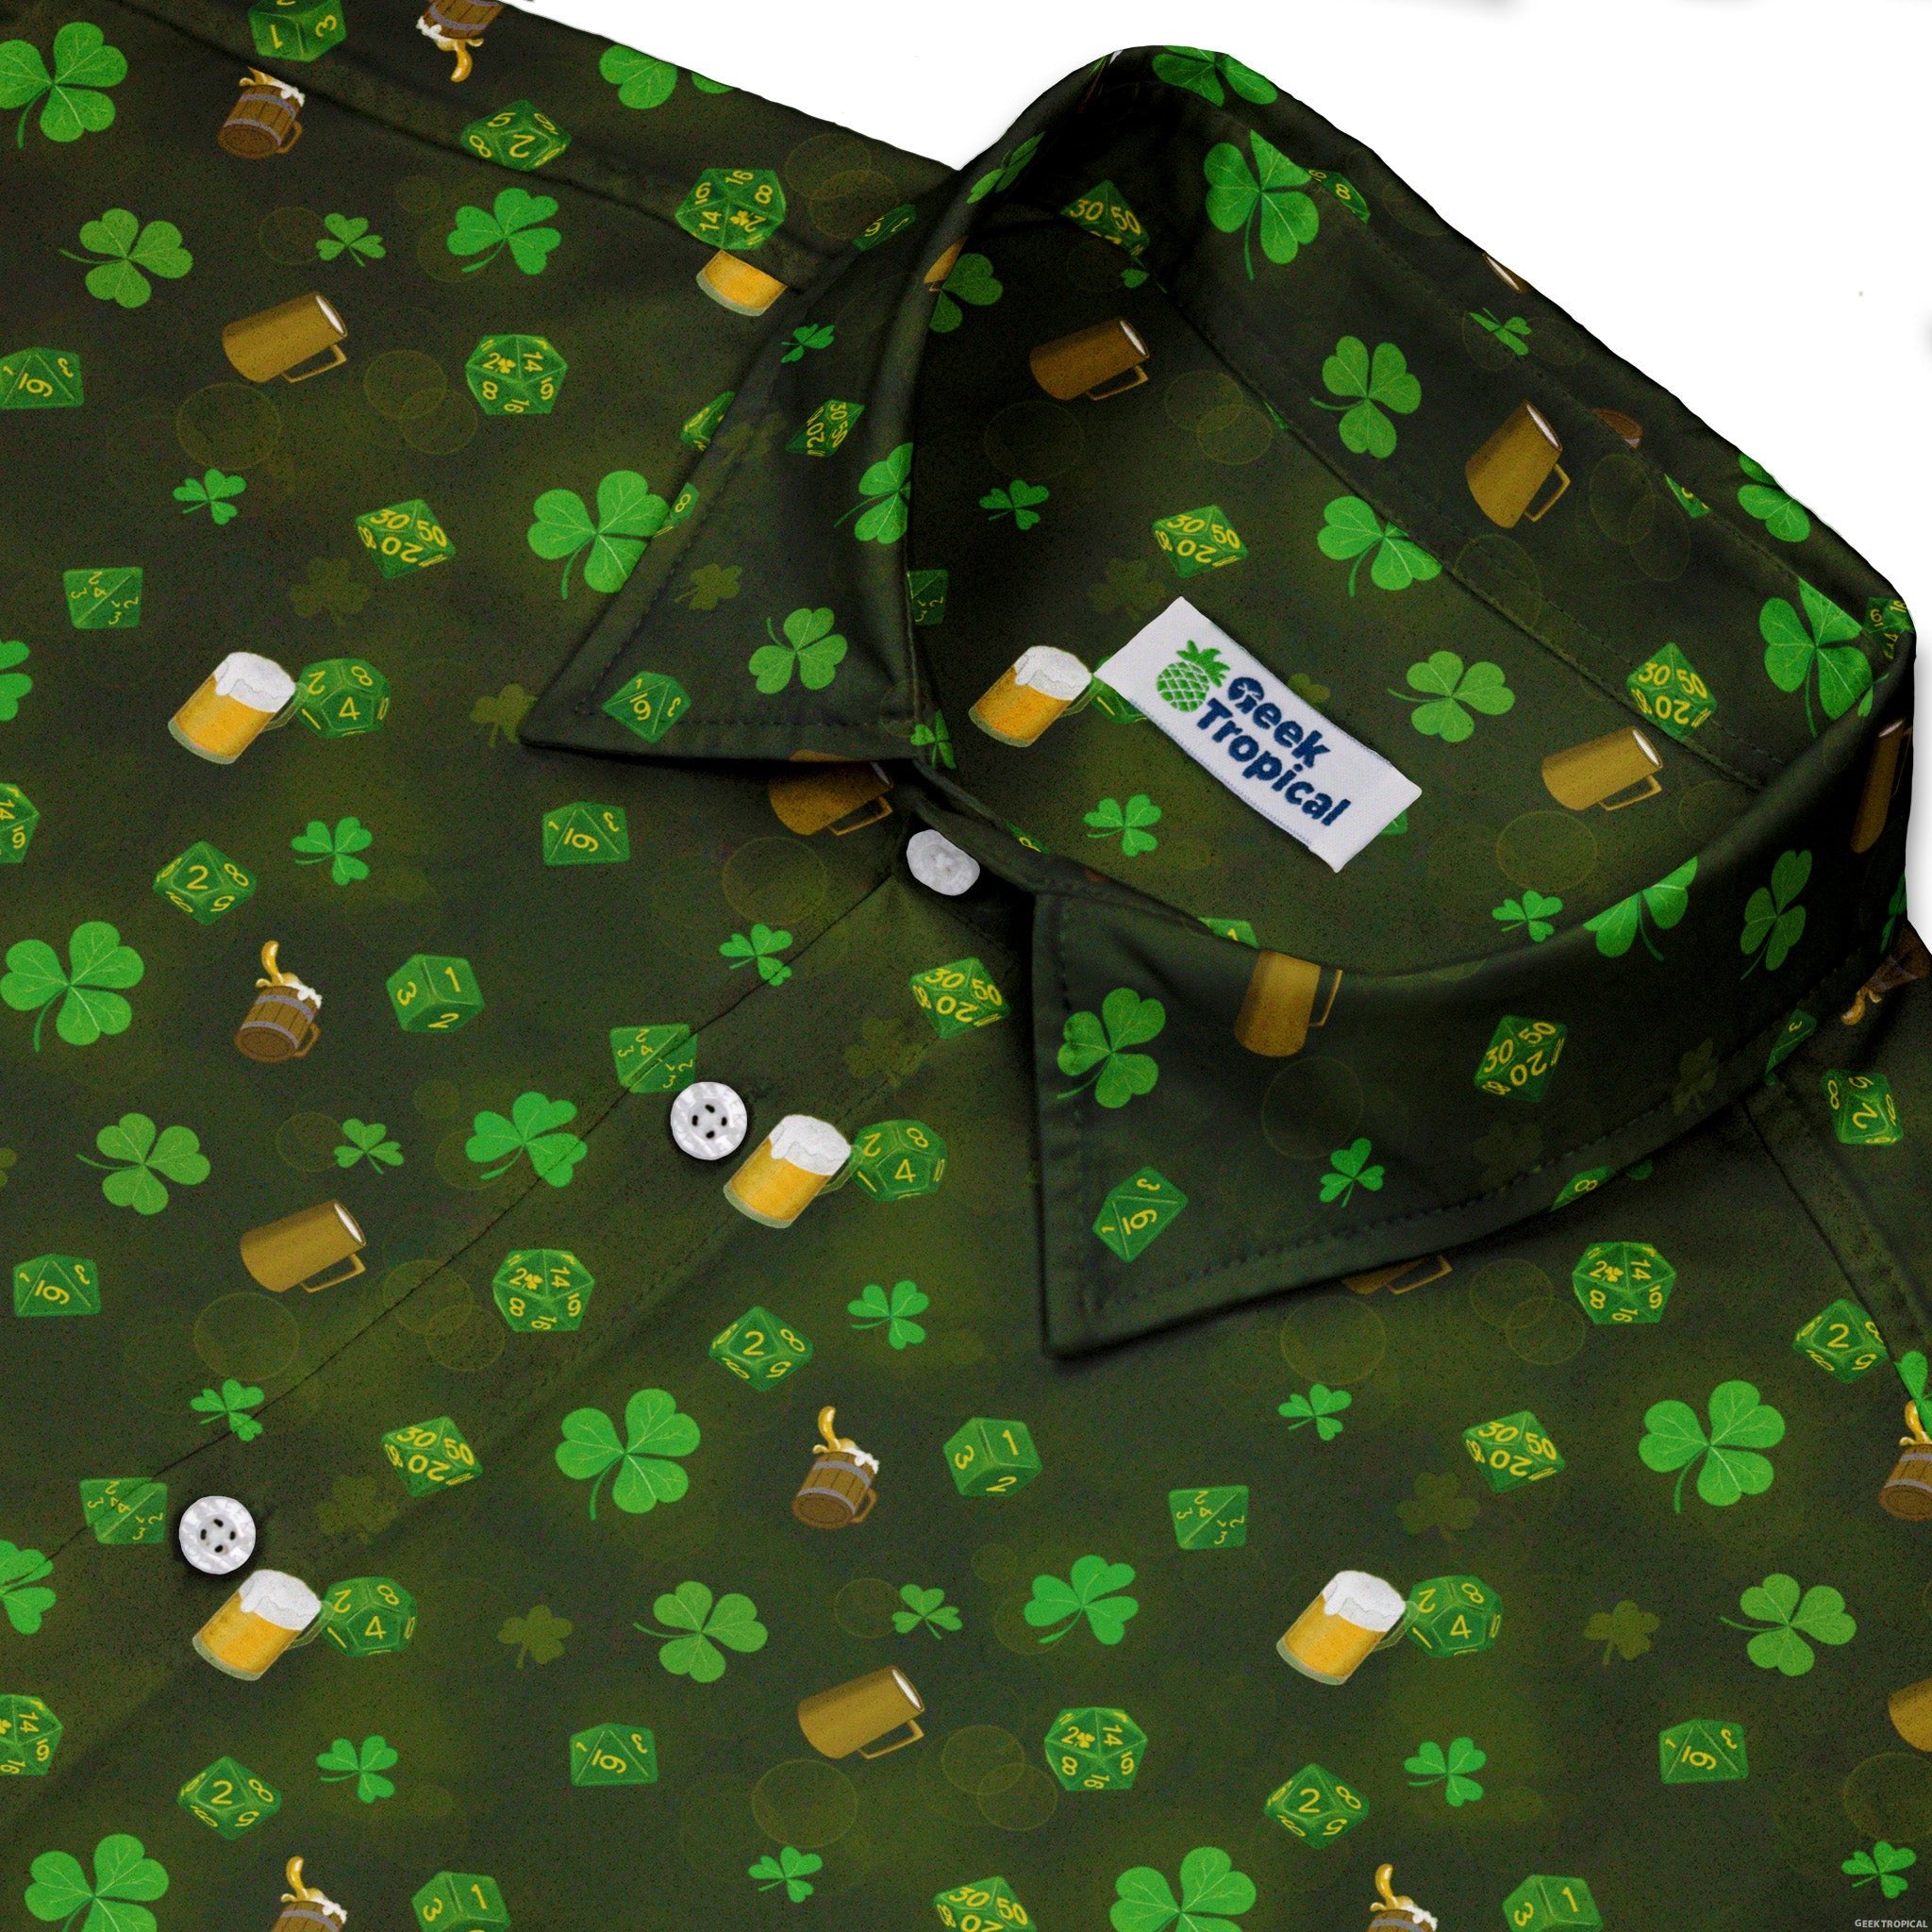 St. Patrick's Day DND Dice Button Up Shirt - adult sizing - Designs by Nathan - dnd & rpg print